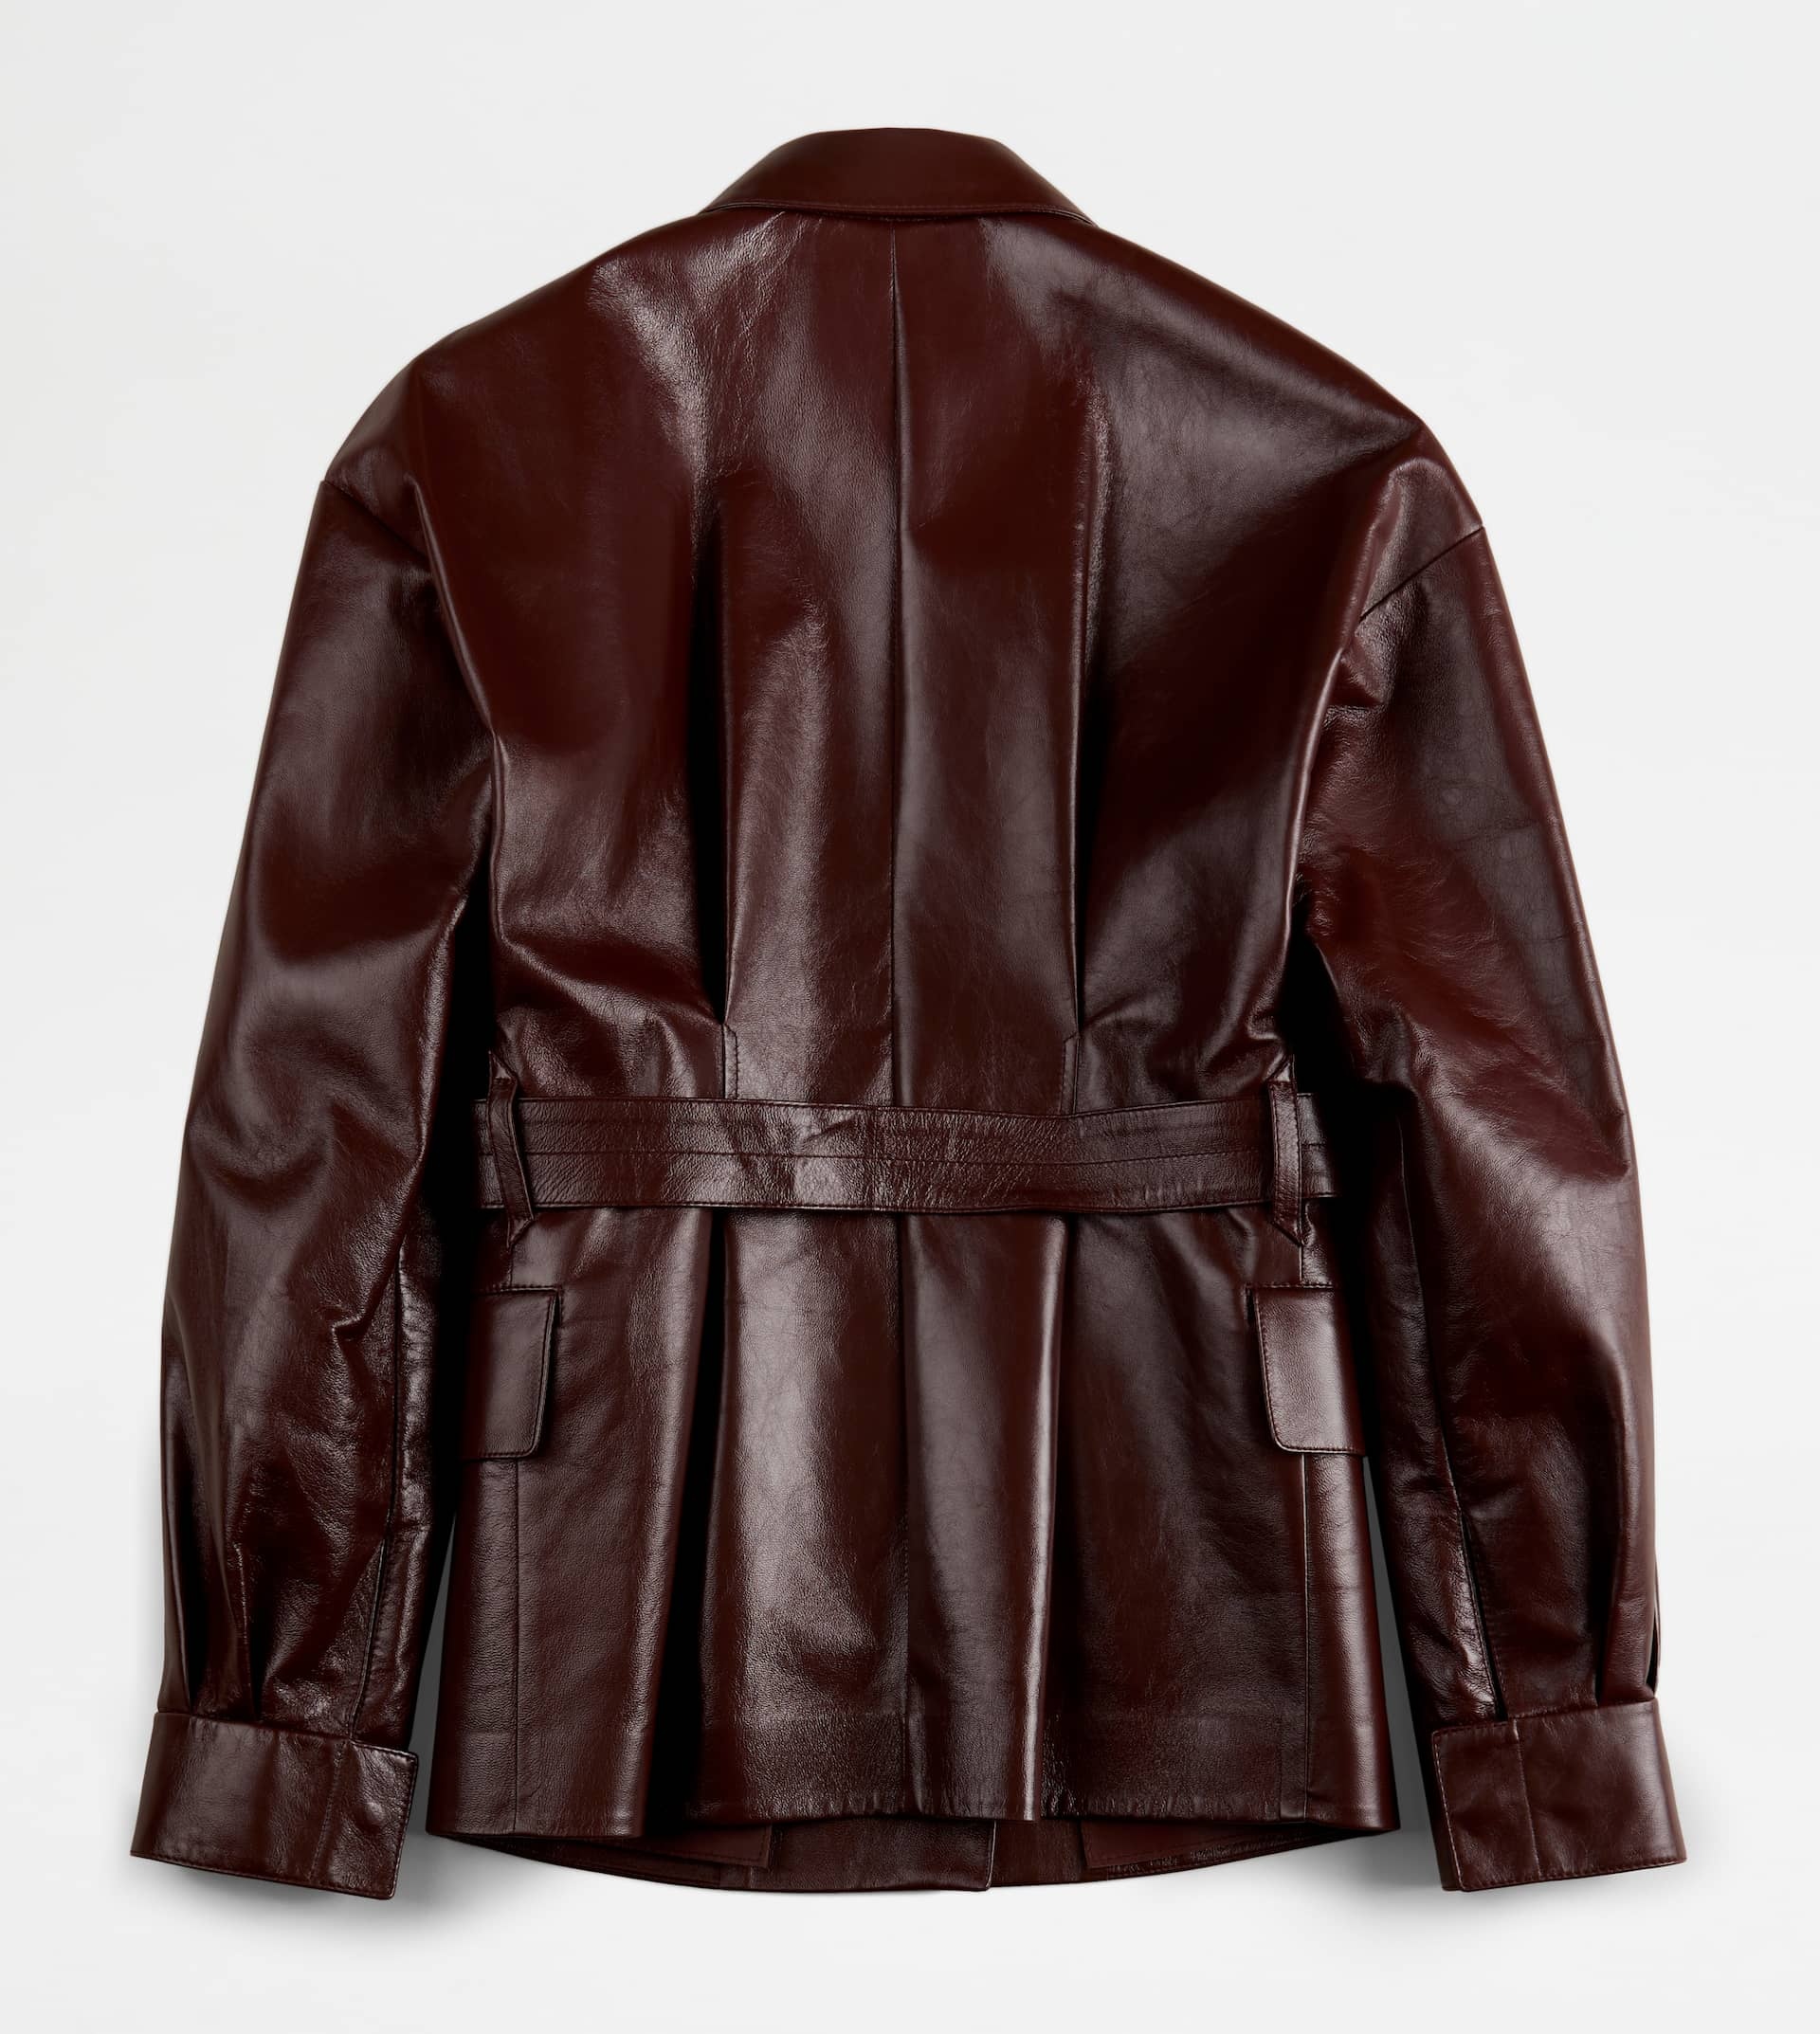 JACKET IN LEATHER - BROWN - 7